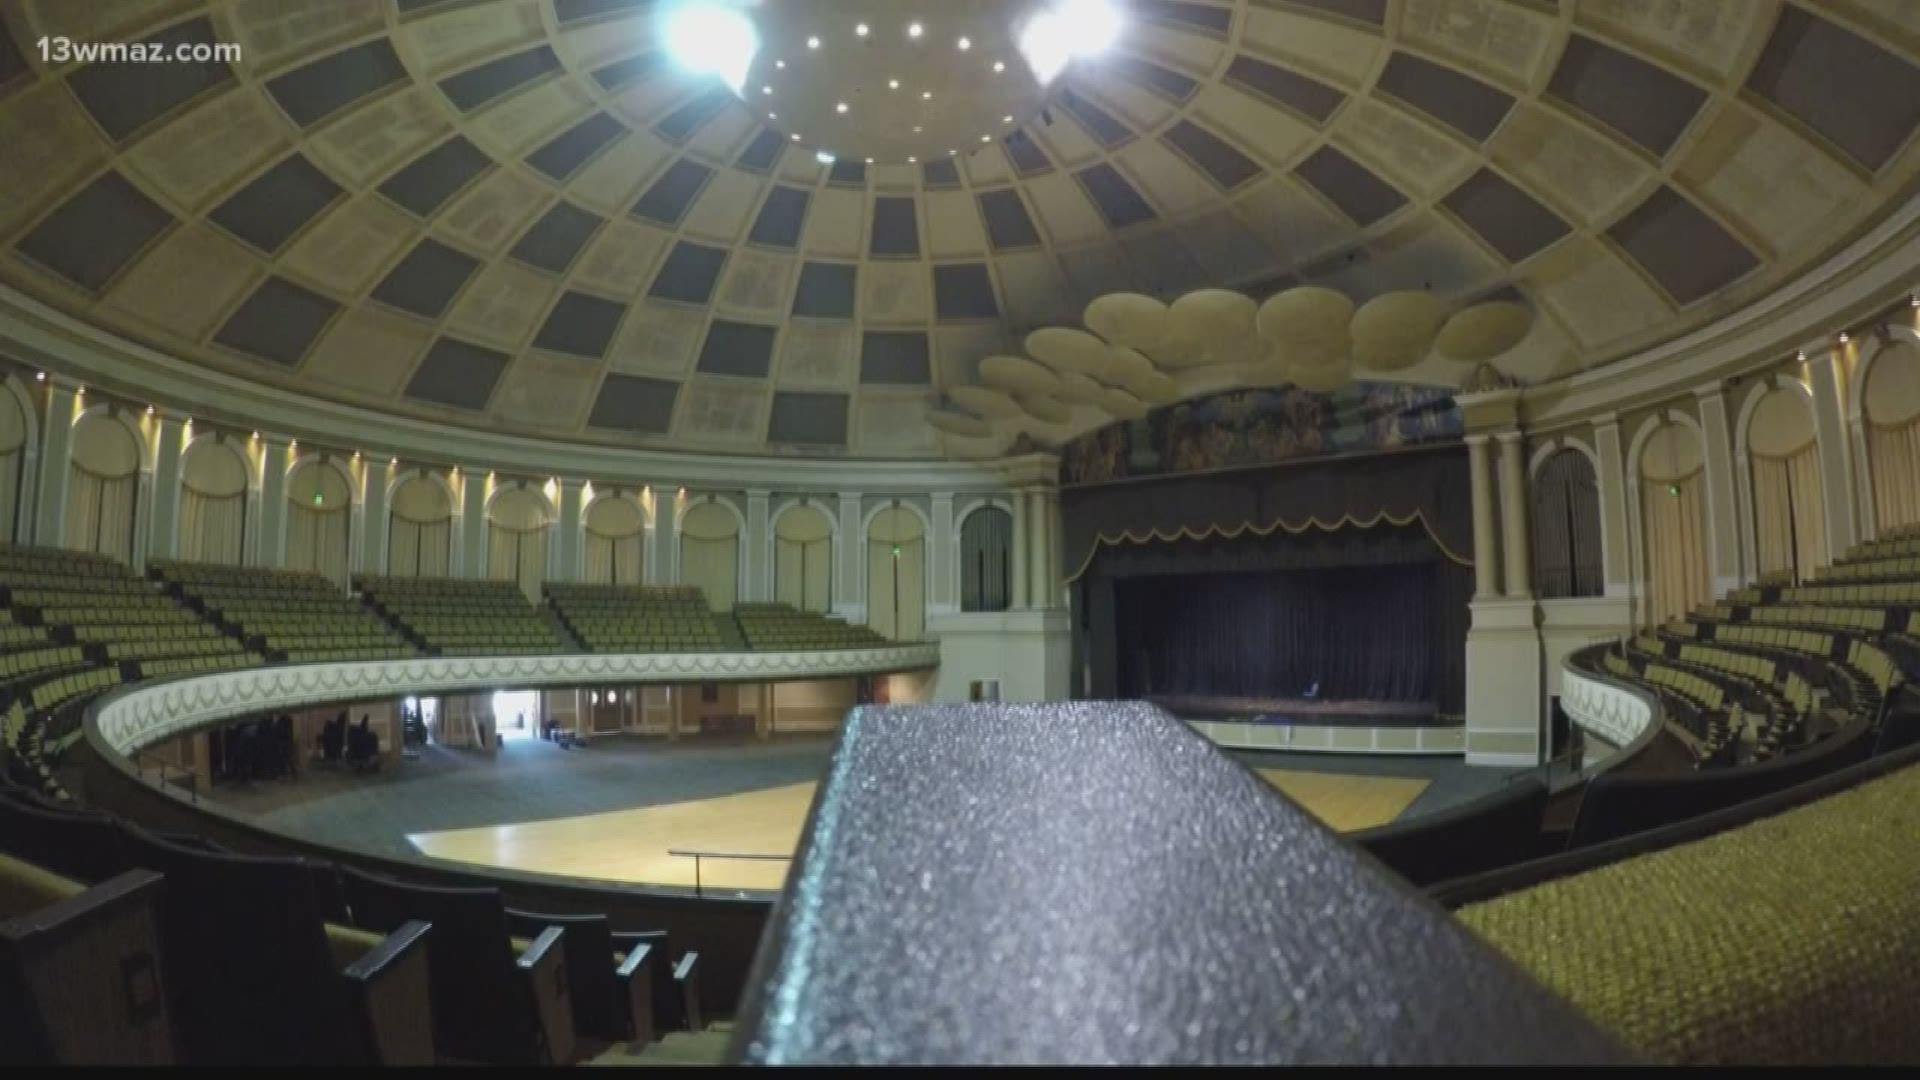 Macon City Auditorium may be renamed for former mayor